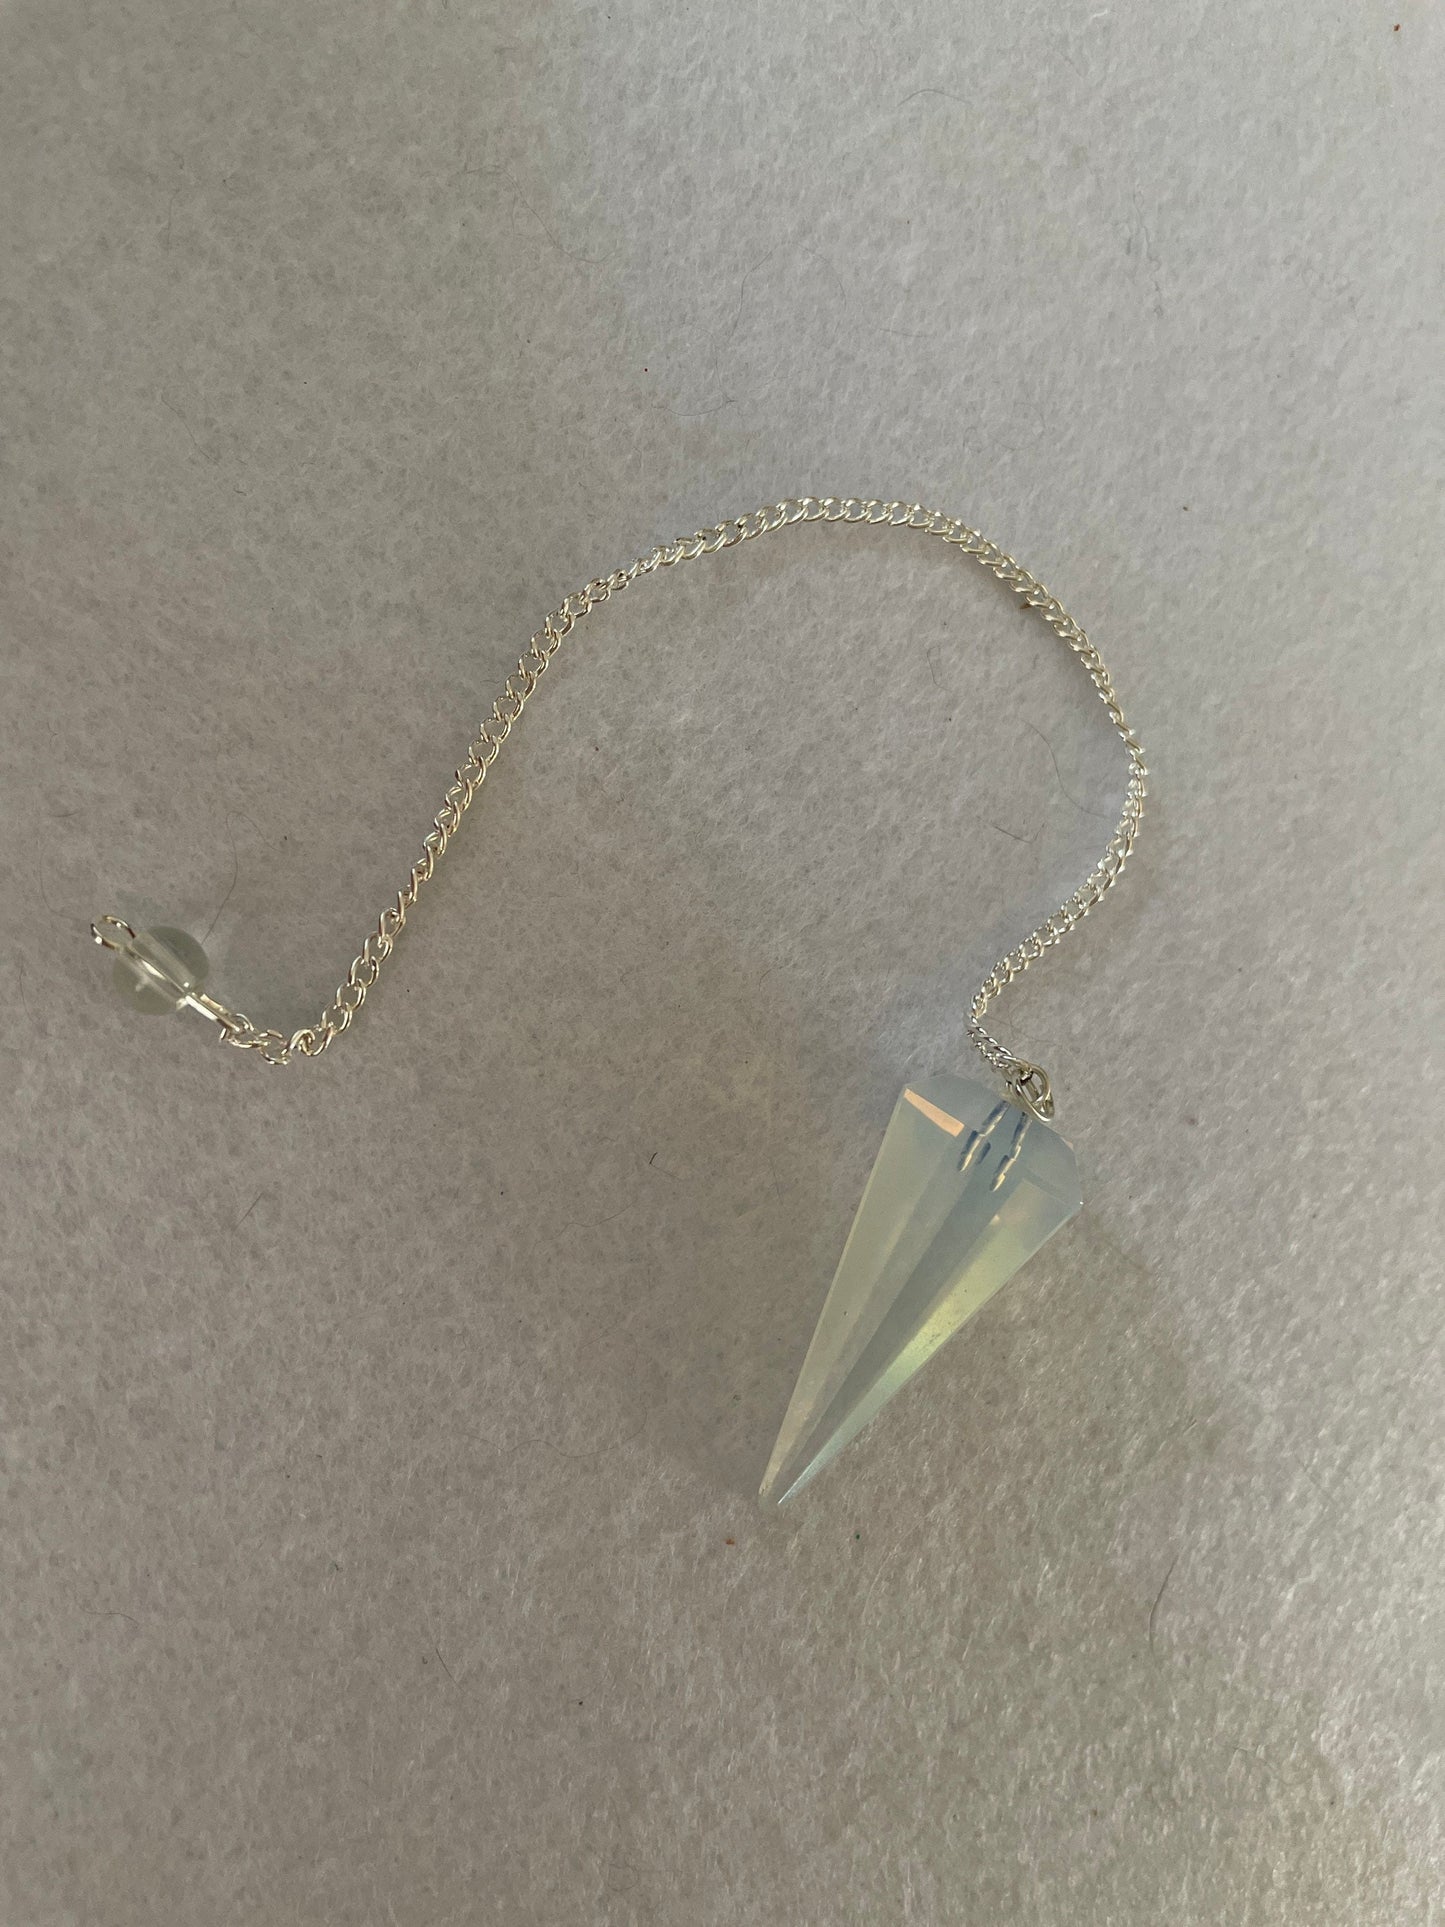 Gorgeous Opalite pendulum is approximately 1.65” and with chain is 8.5” total length